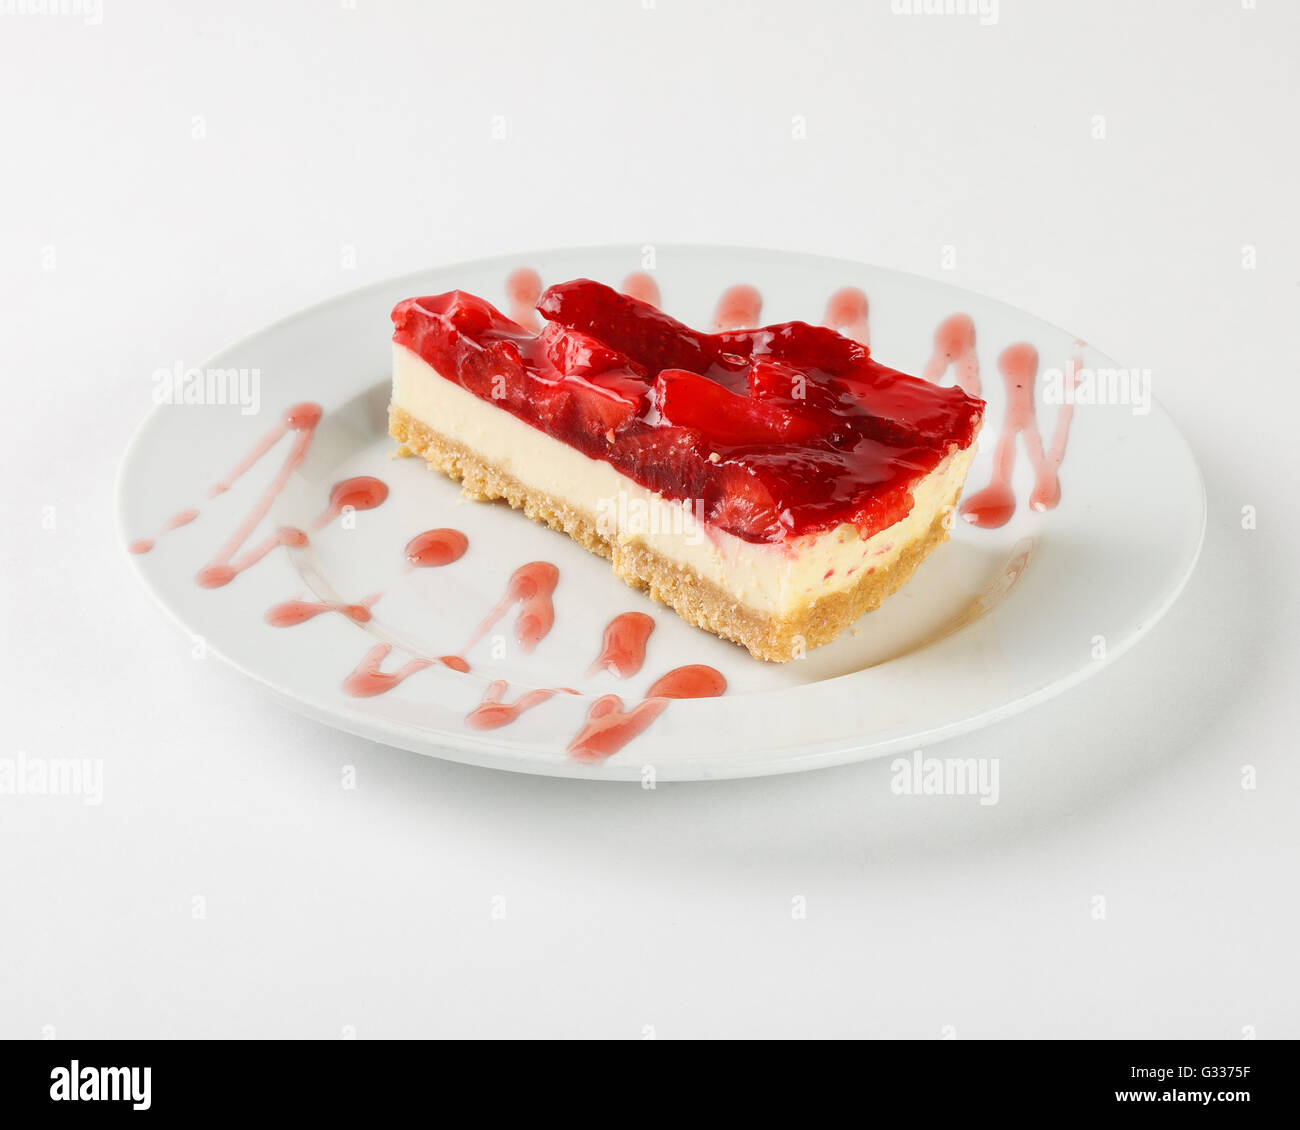 Delicious cheesecake with strawberry jelly and jam on the plate on white background. Close up side view. Stock Photo